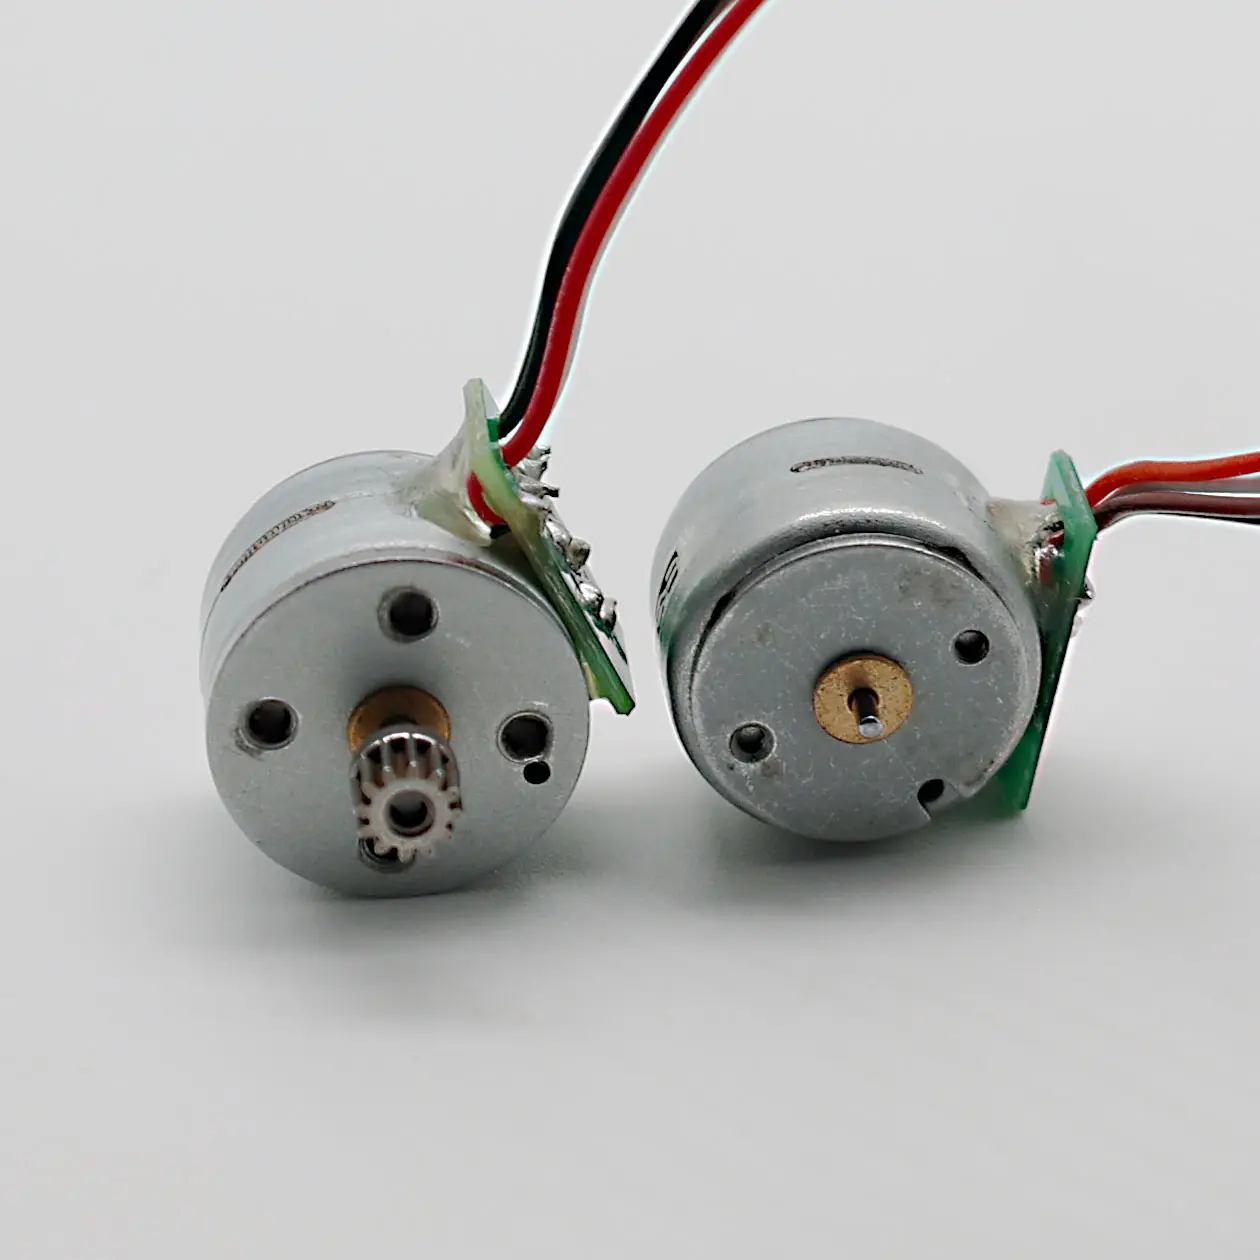 DC 5V 1.0mm Shaft 15BY Micro Mini 15mm Precision 2-phase 4-wire Stepper Motor